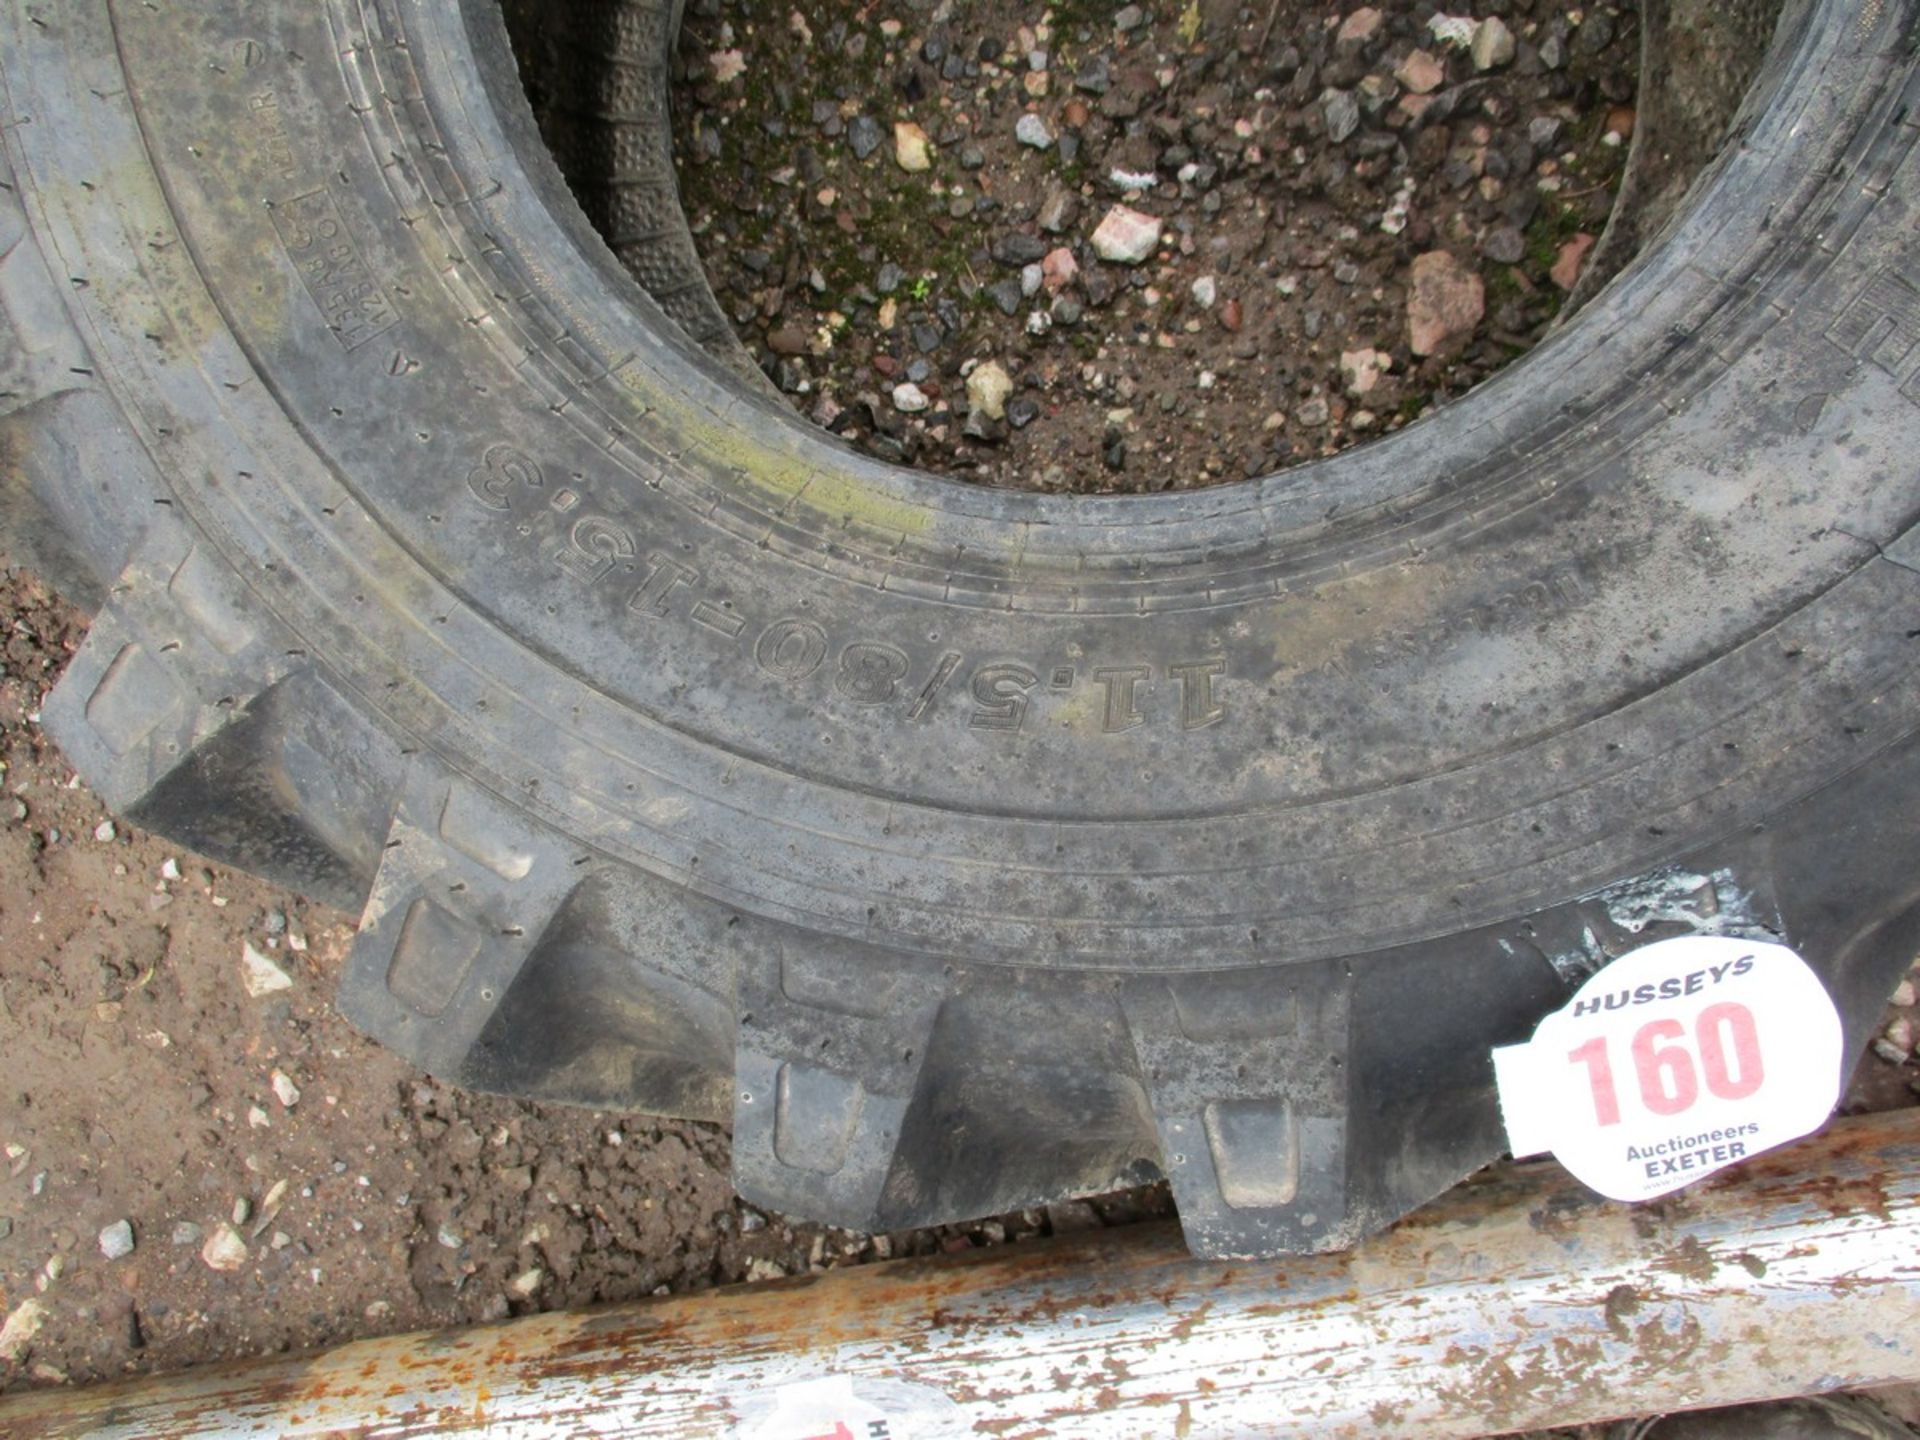 1 TYRE 11.5/80-15.3 - Image 2 of 2